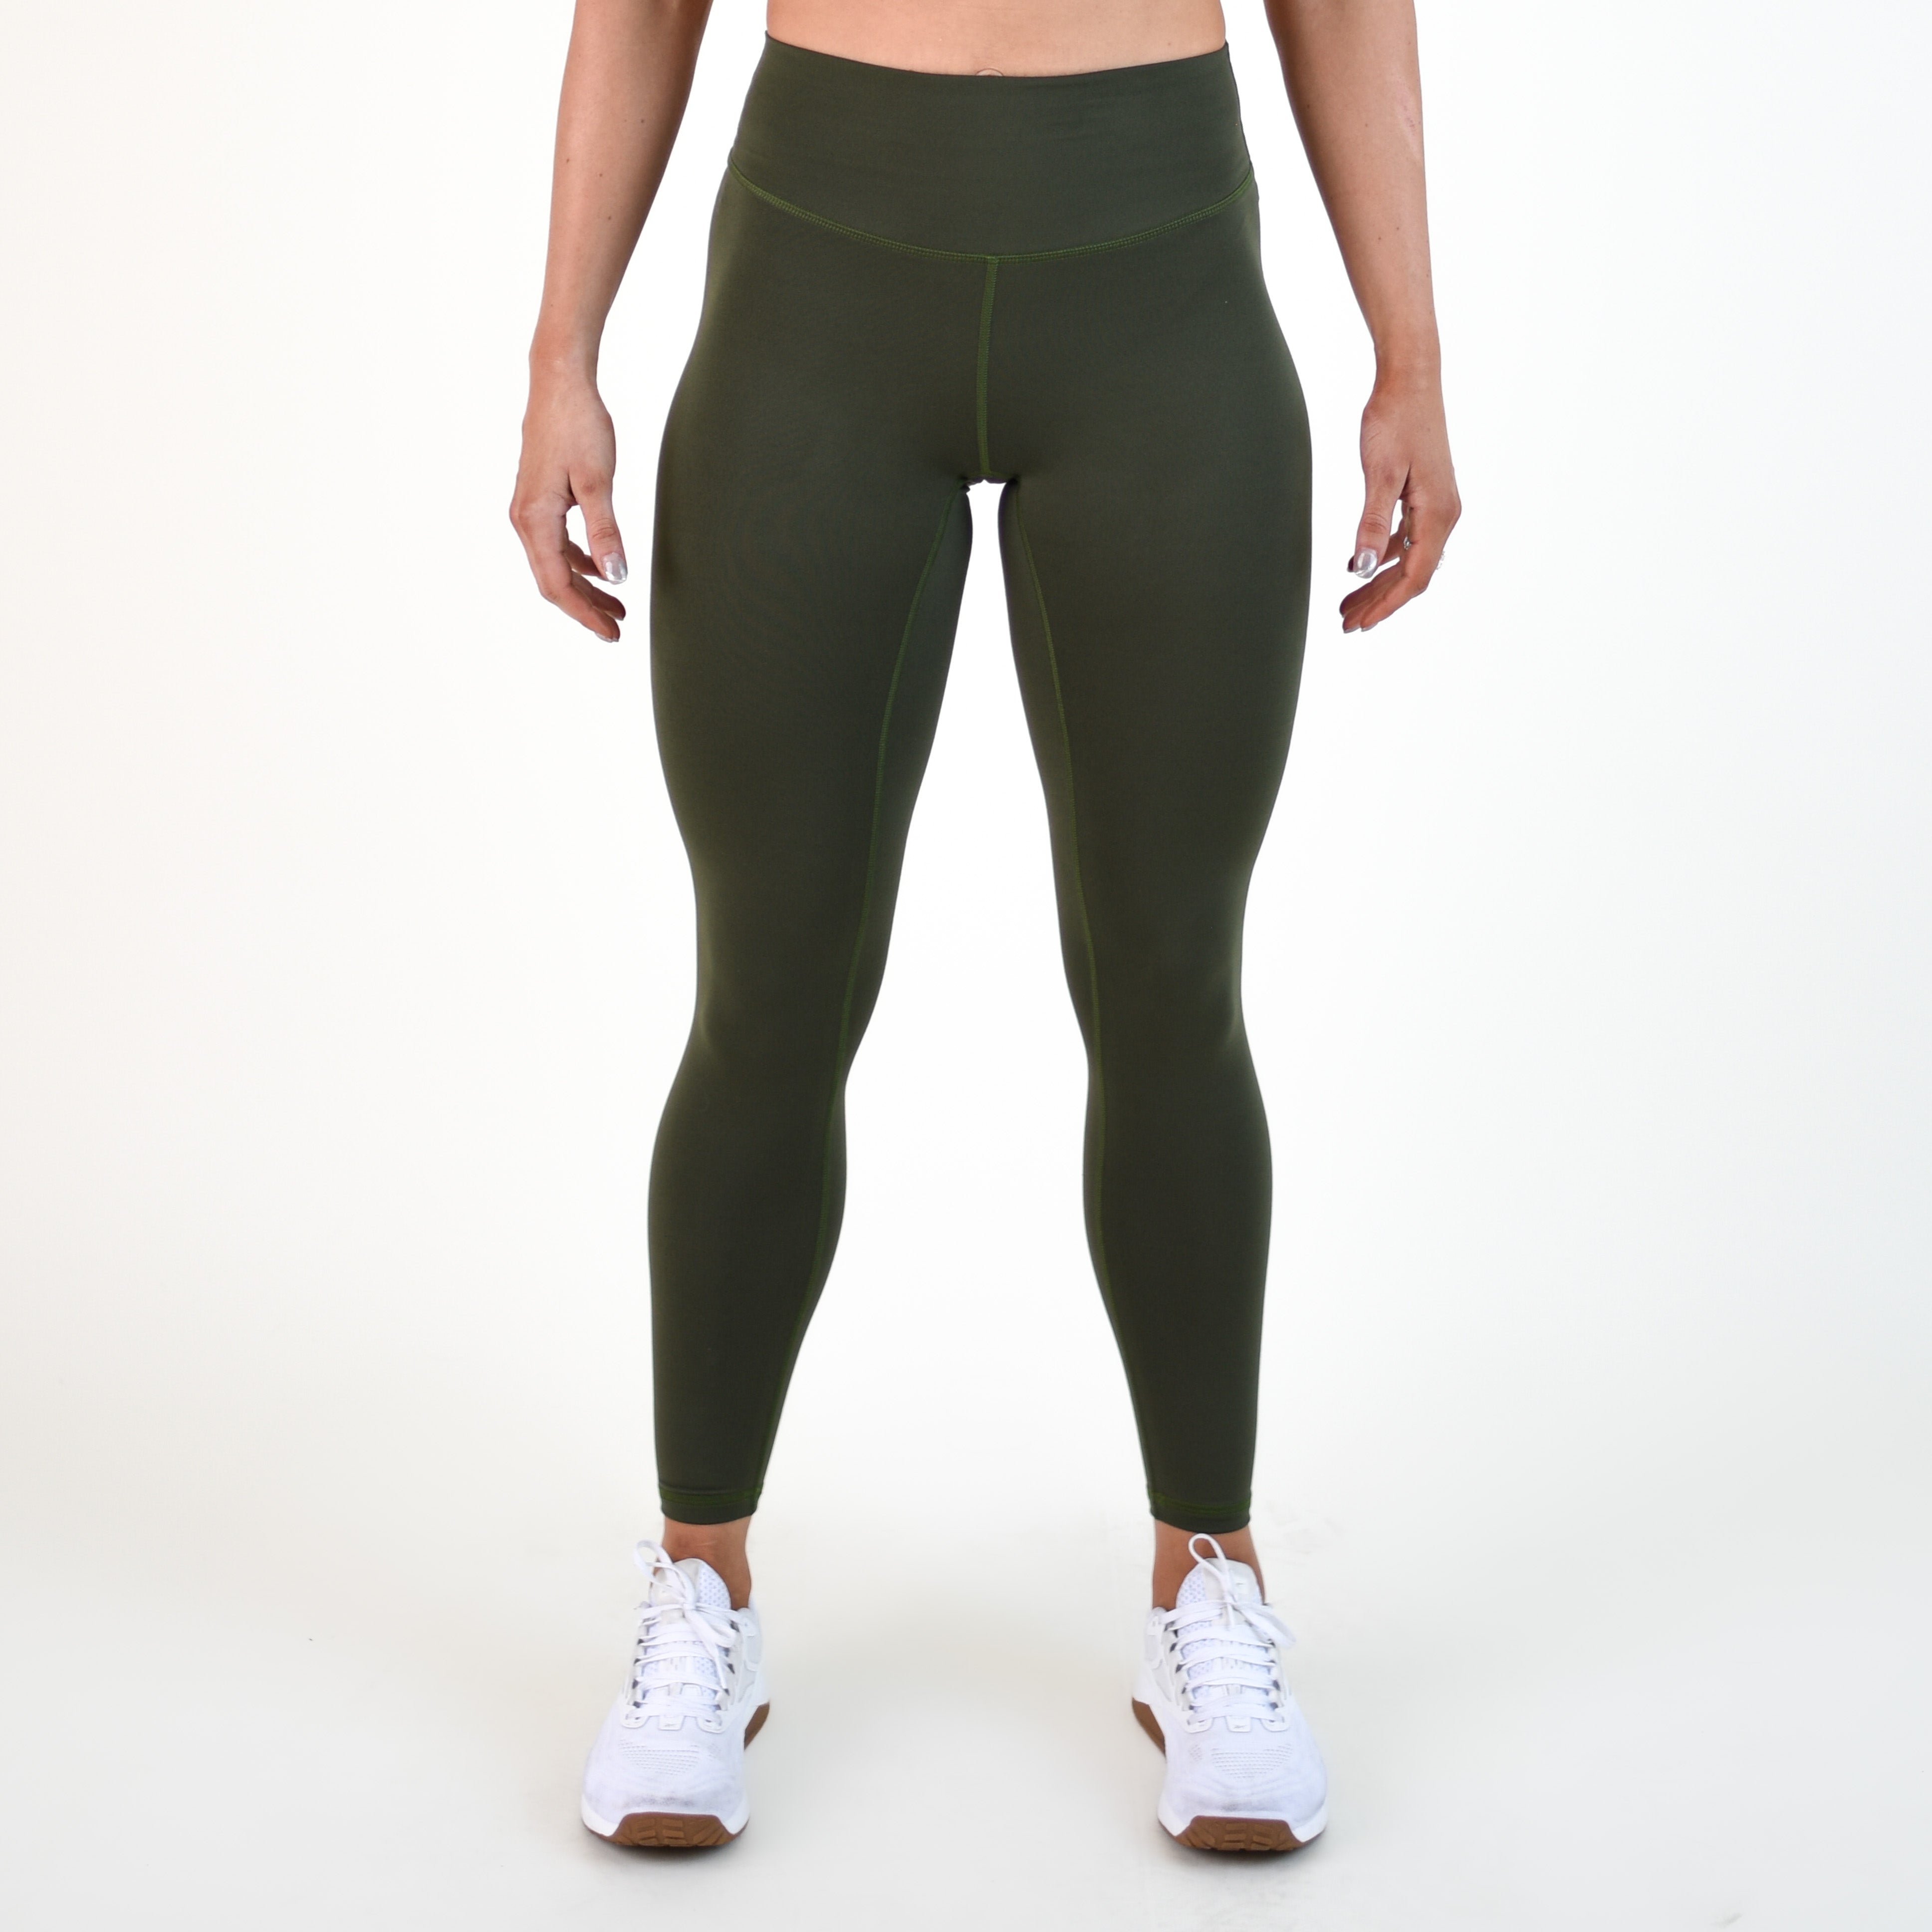 Chive Contoured Workout Legging - Go Go - Curved High Rise